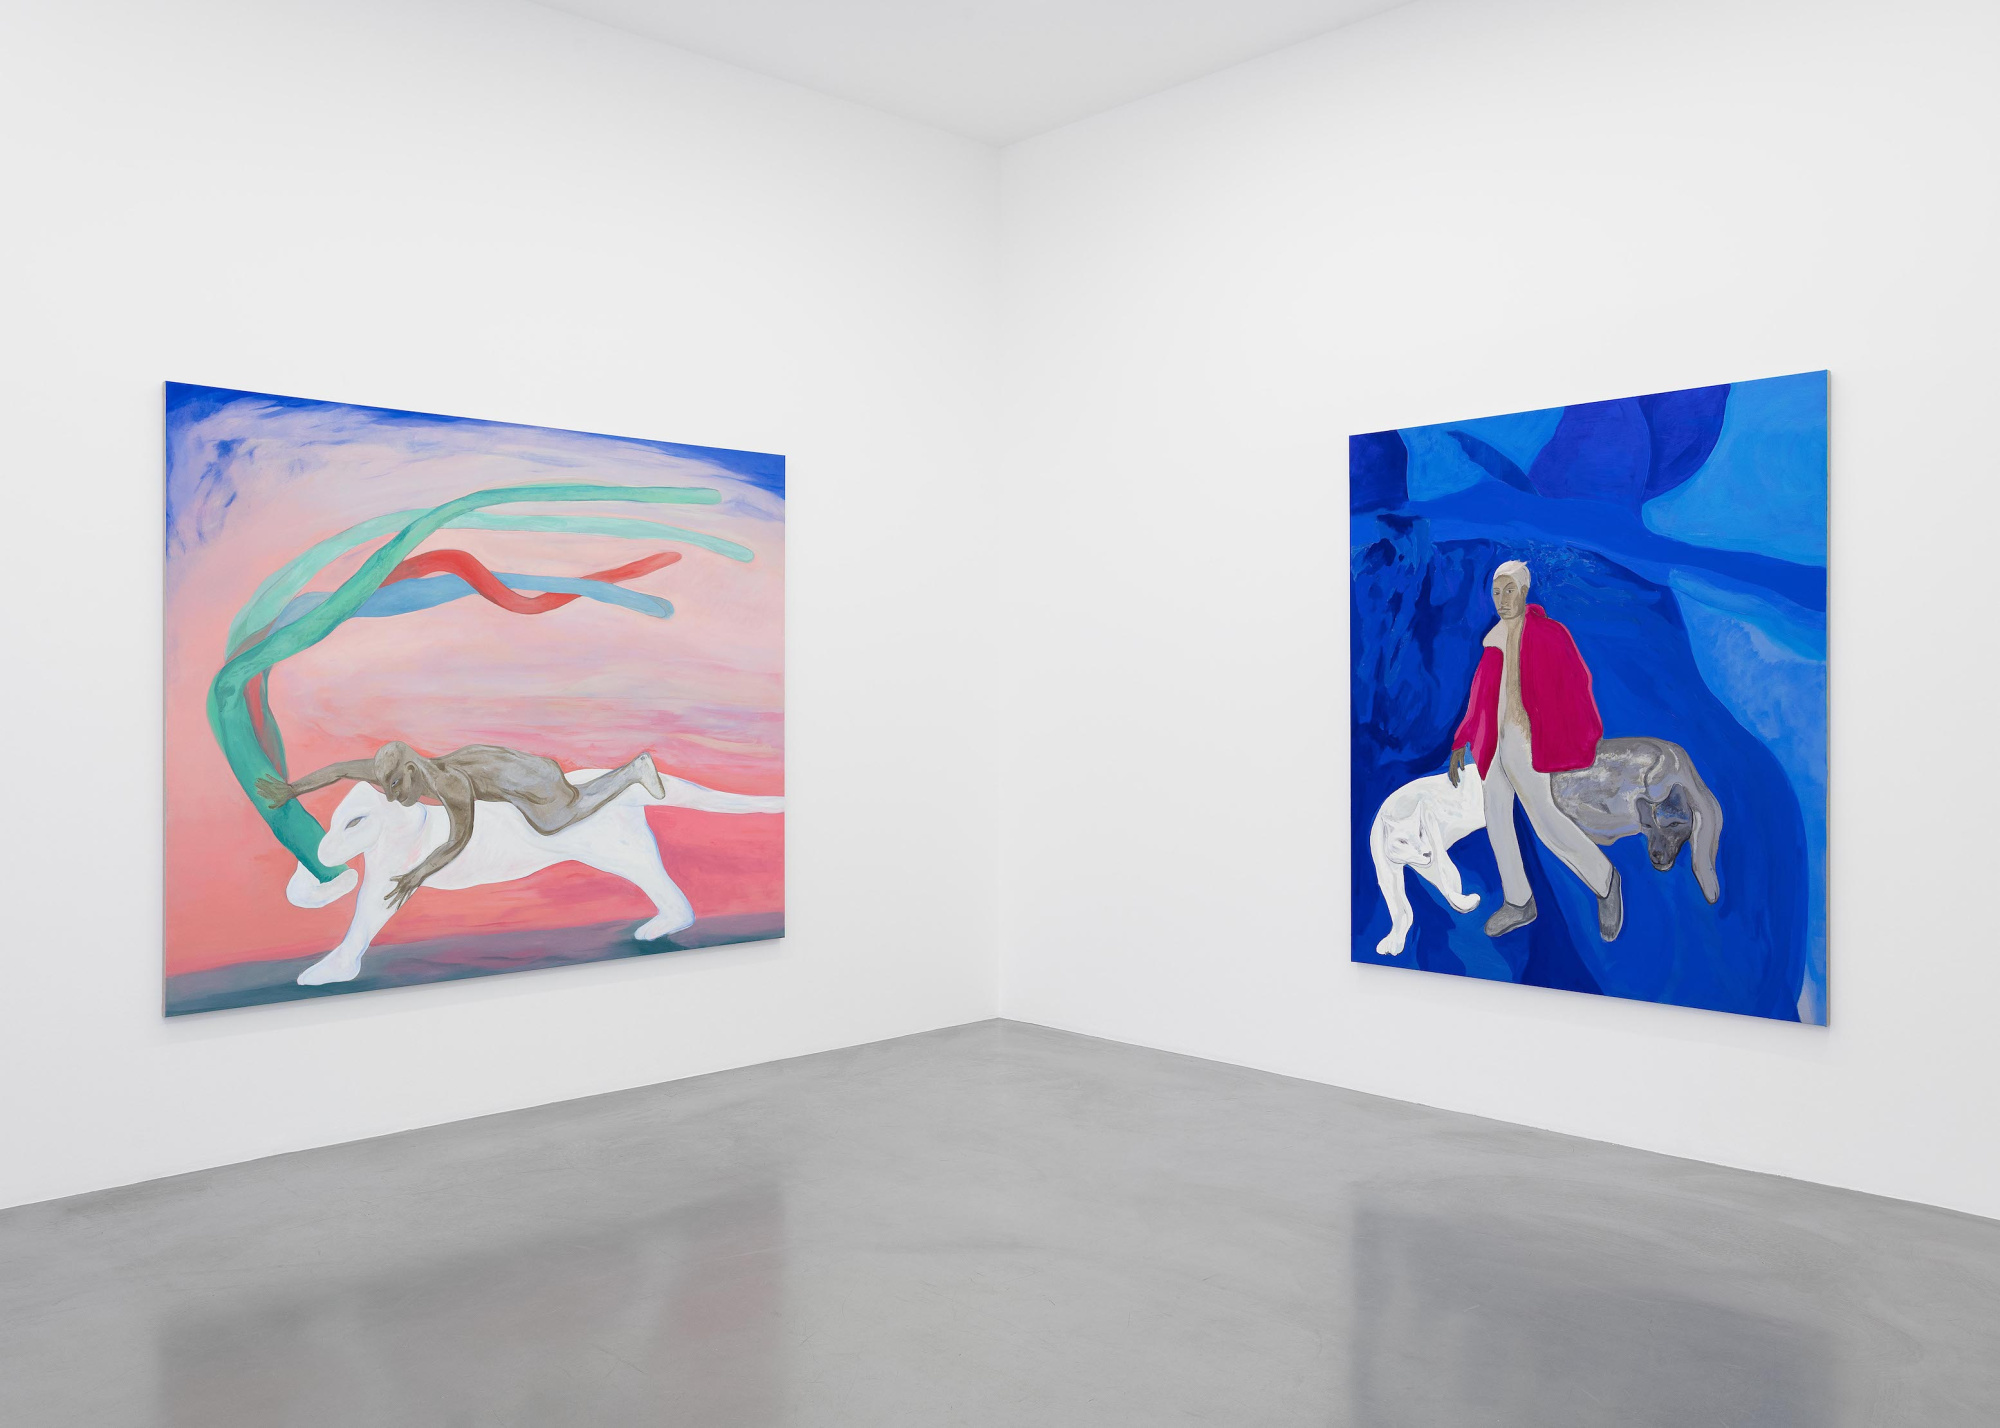 Paolo Salvador, installation shot from Perrotin Gallery